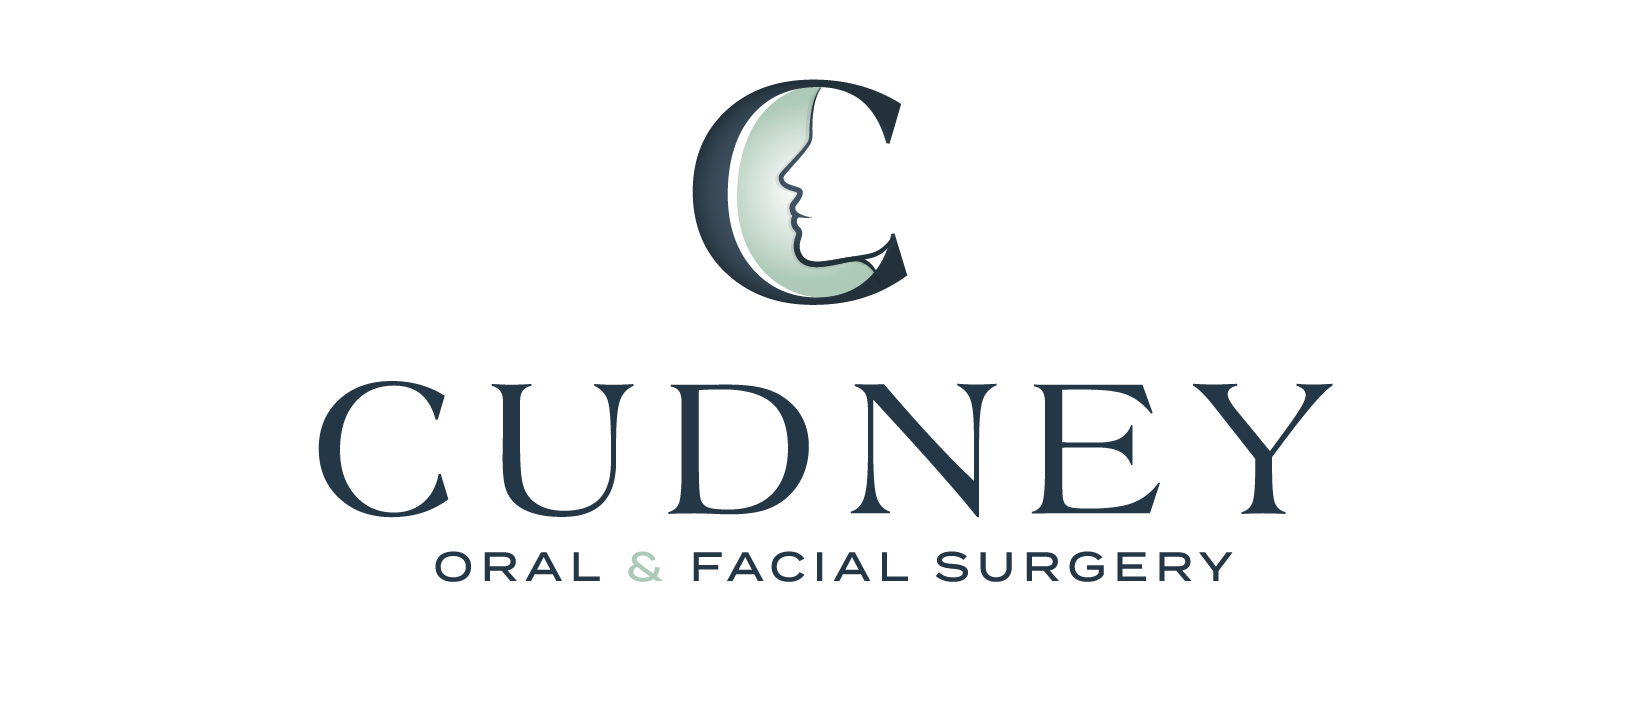 Link to Cudney Oral and Facial Surgery home page